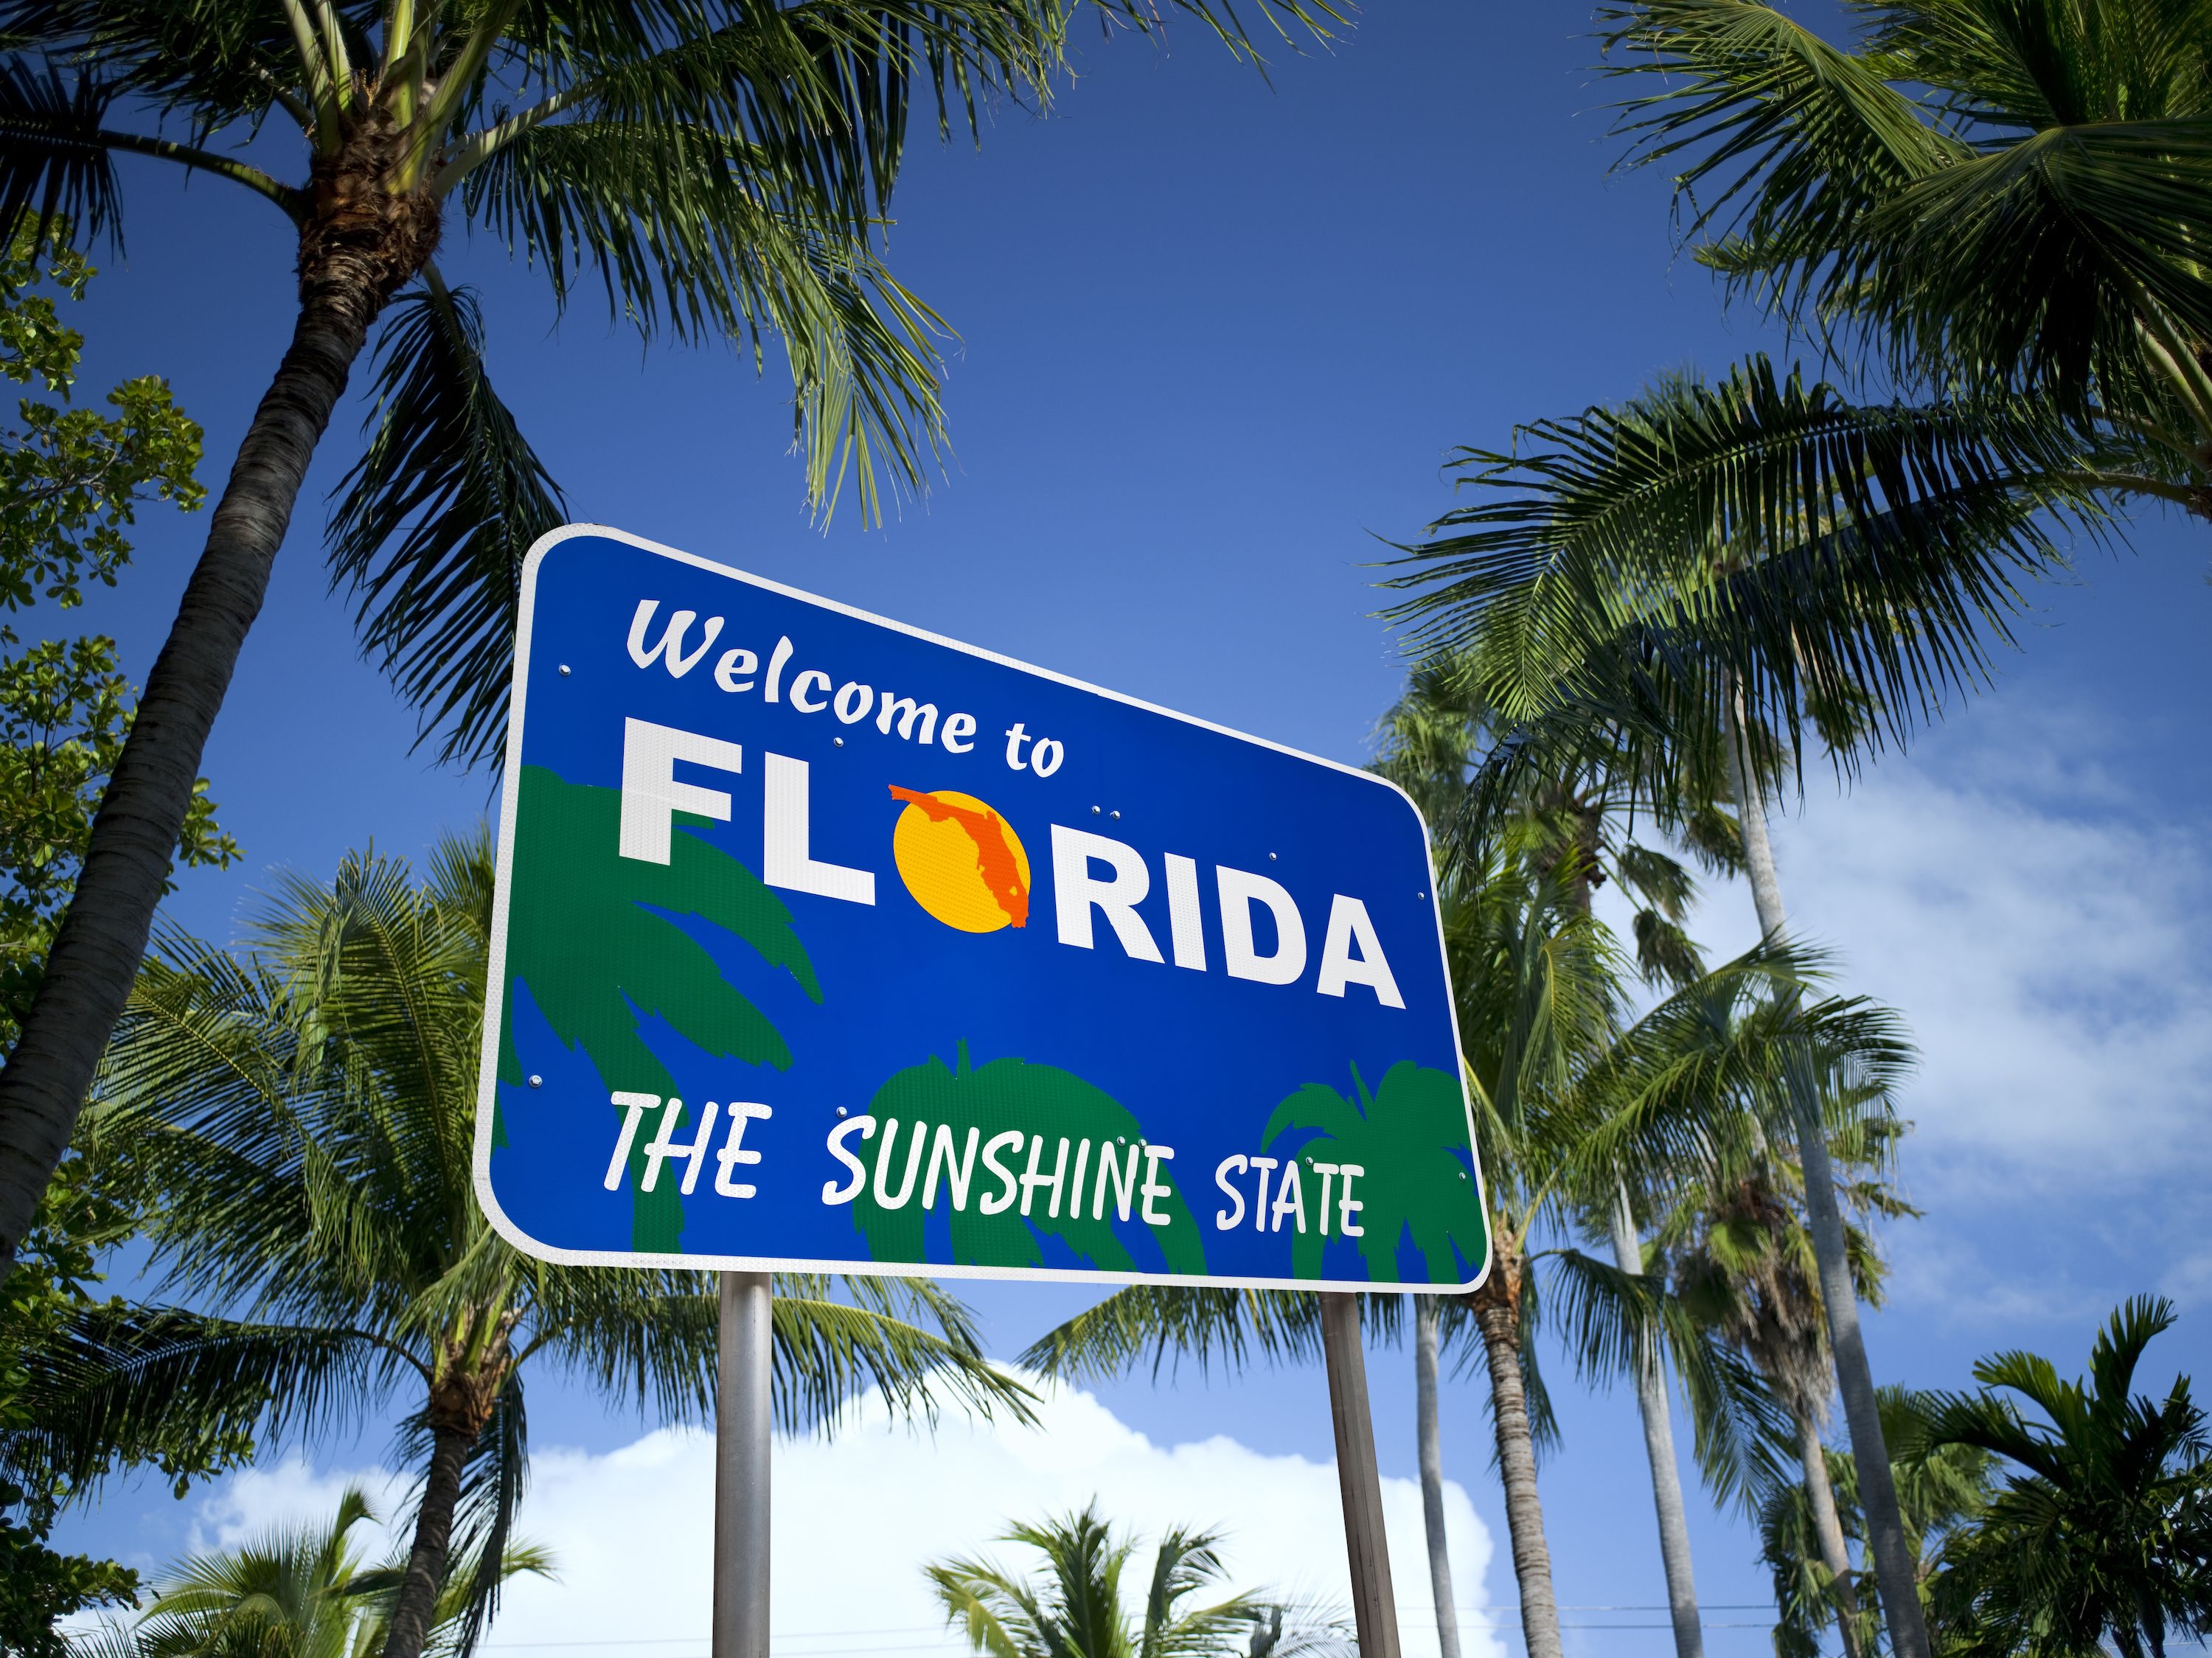 Welcome to Florida! The Sunshine State.